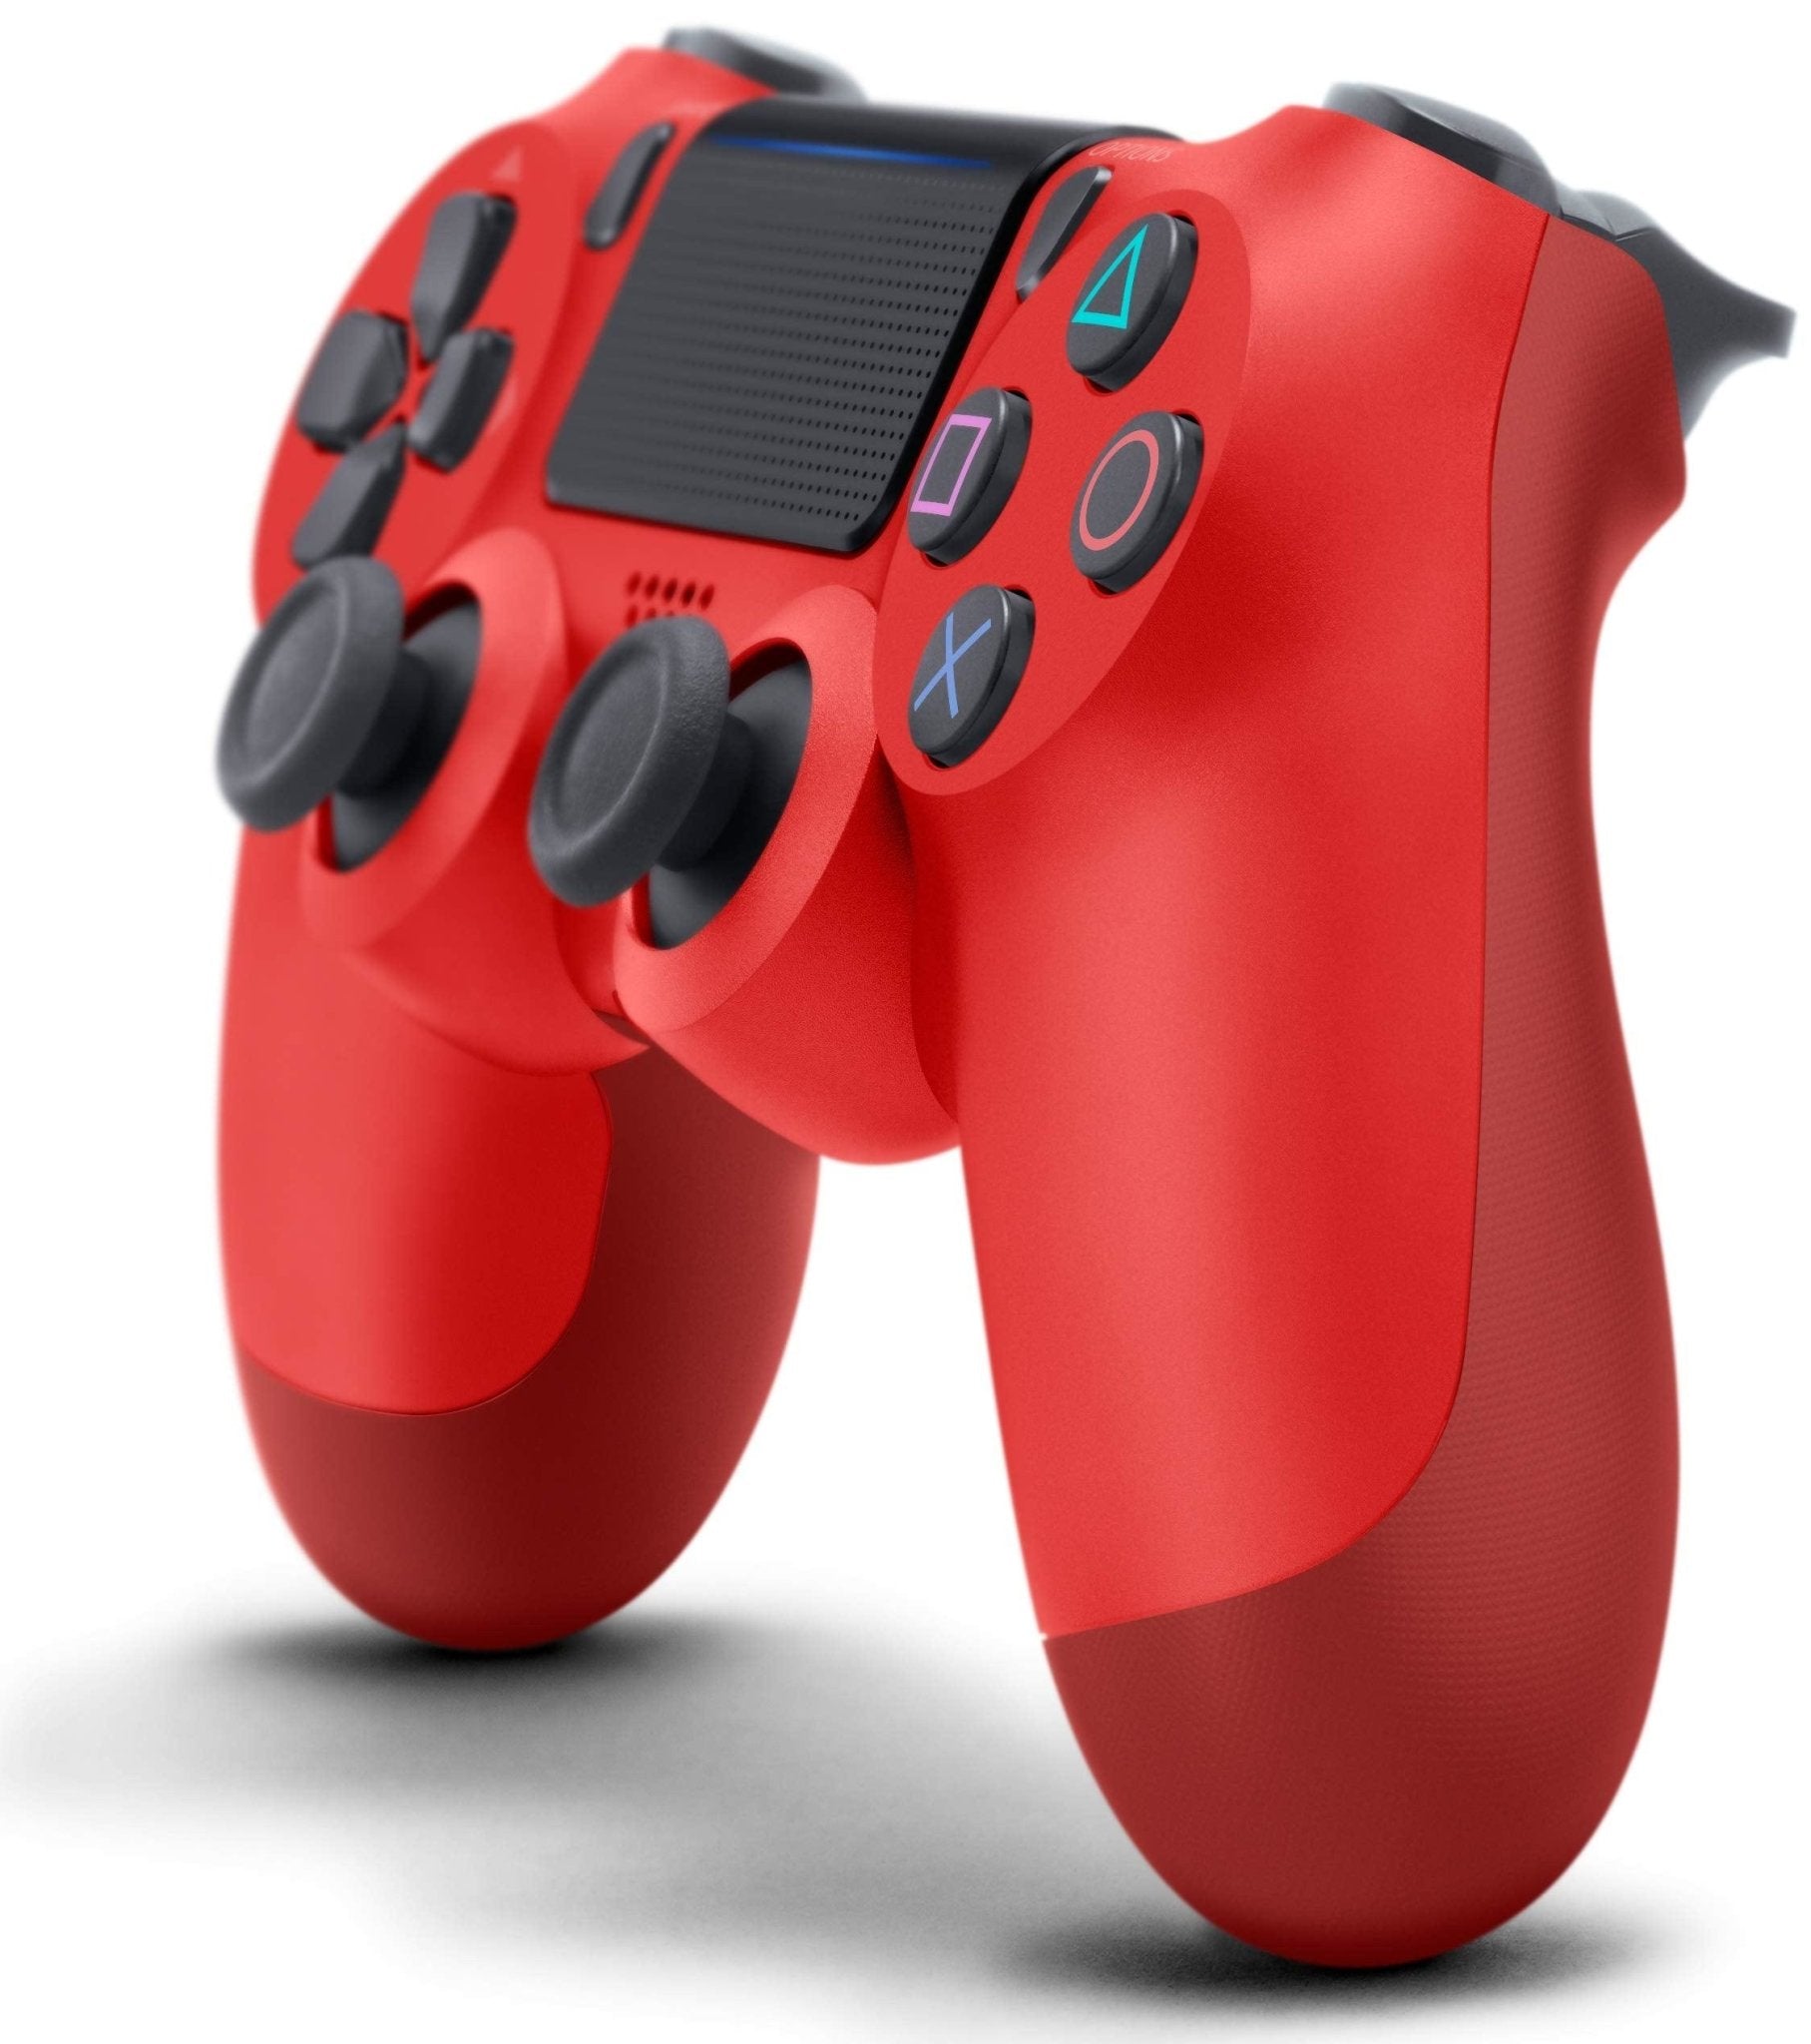 Dualshock 4 Wireless PS4 Controller : Red for Sony Playstation 4 - Office Catch